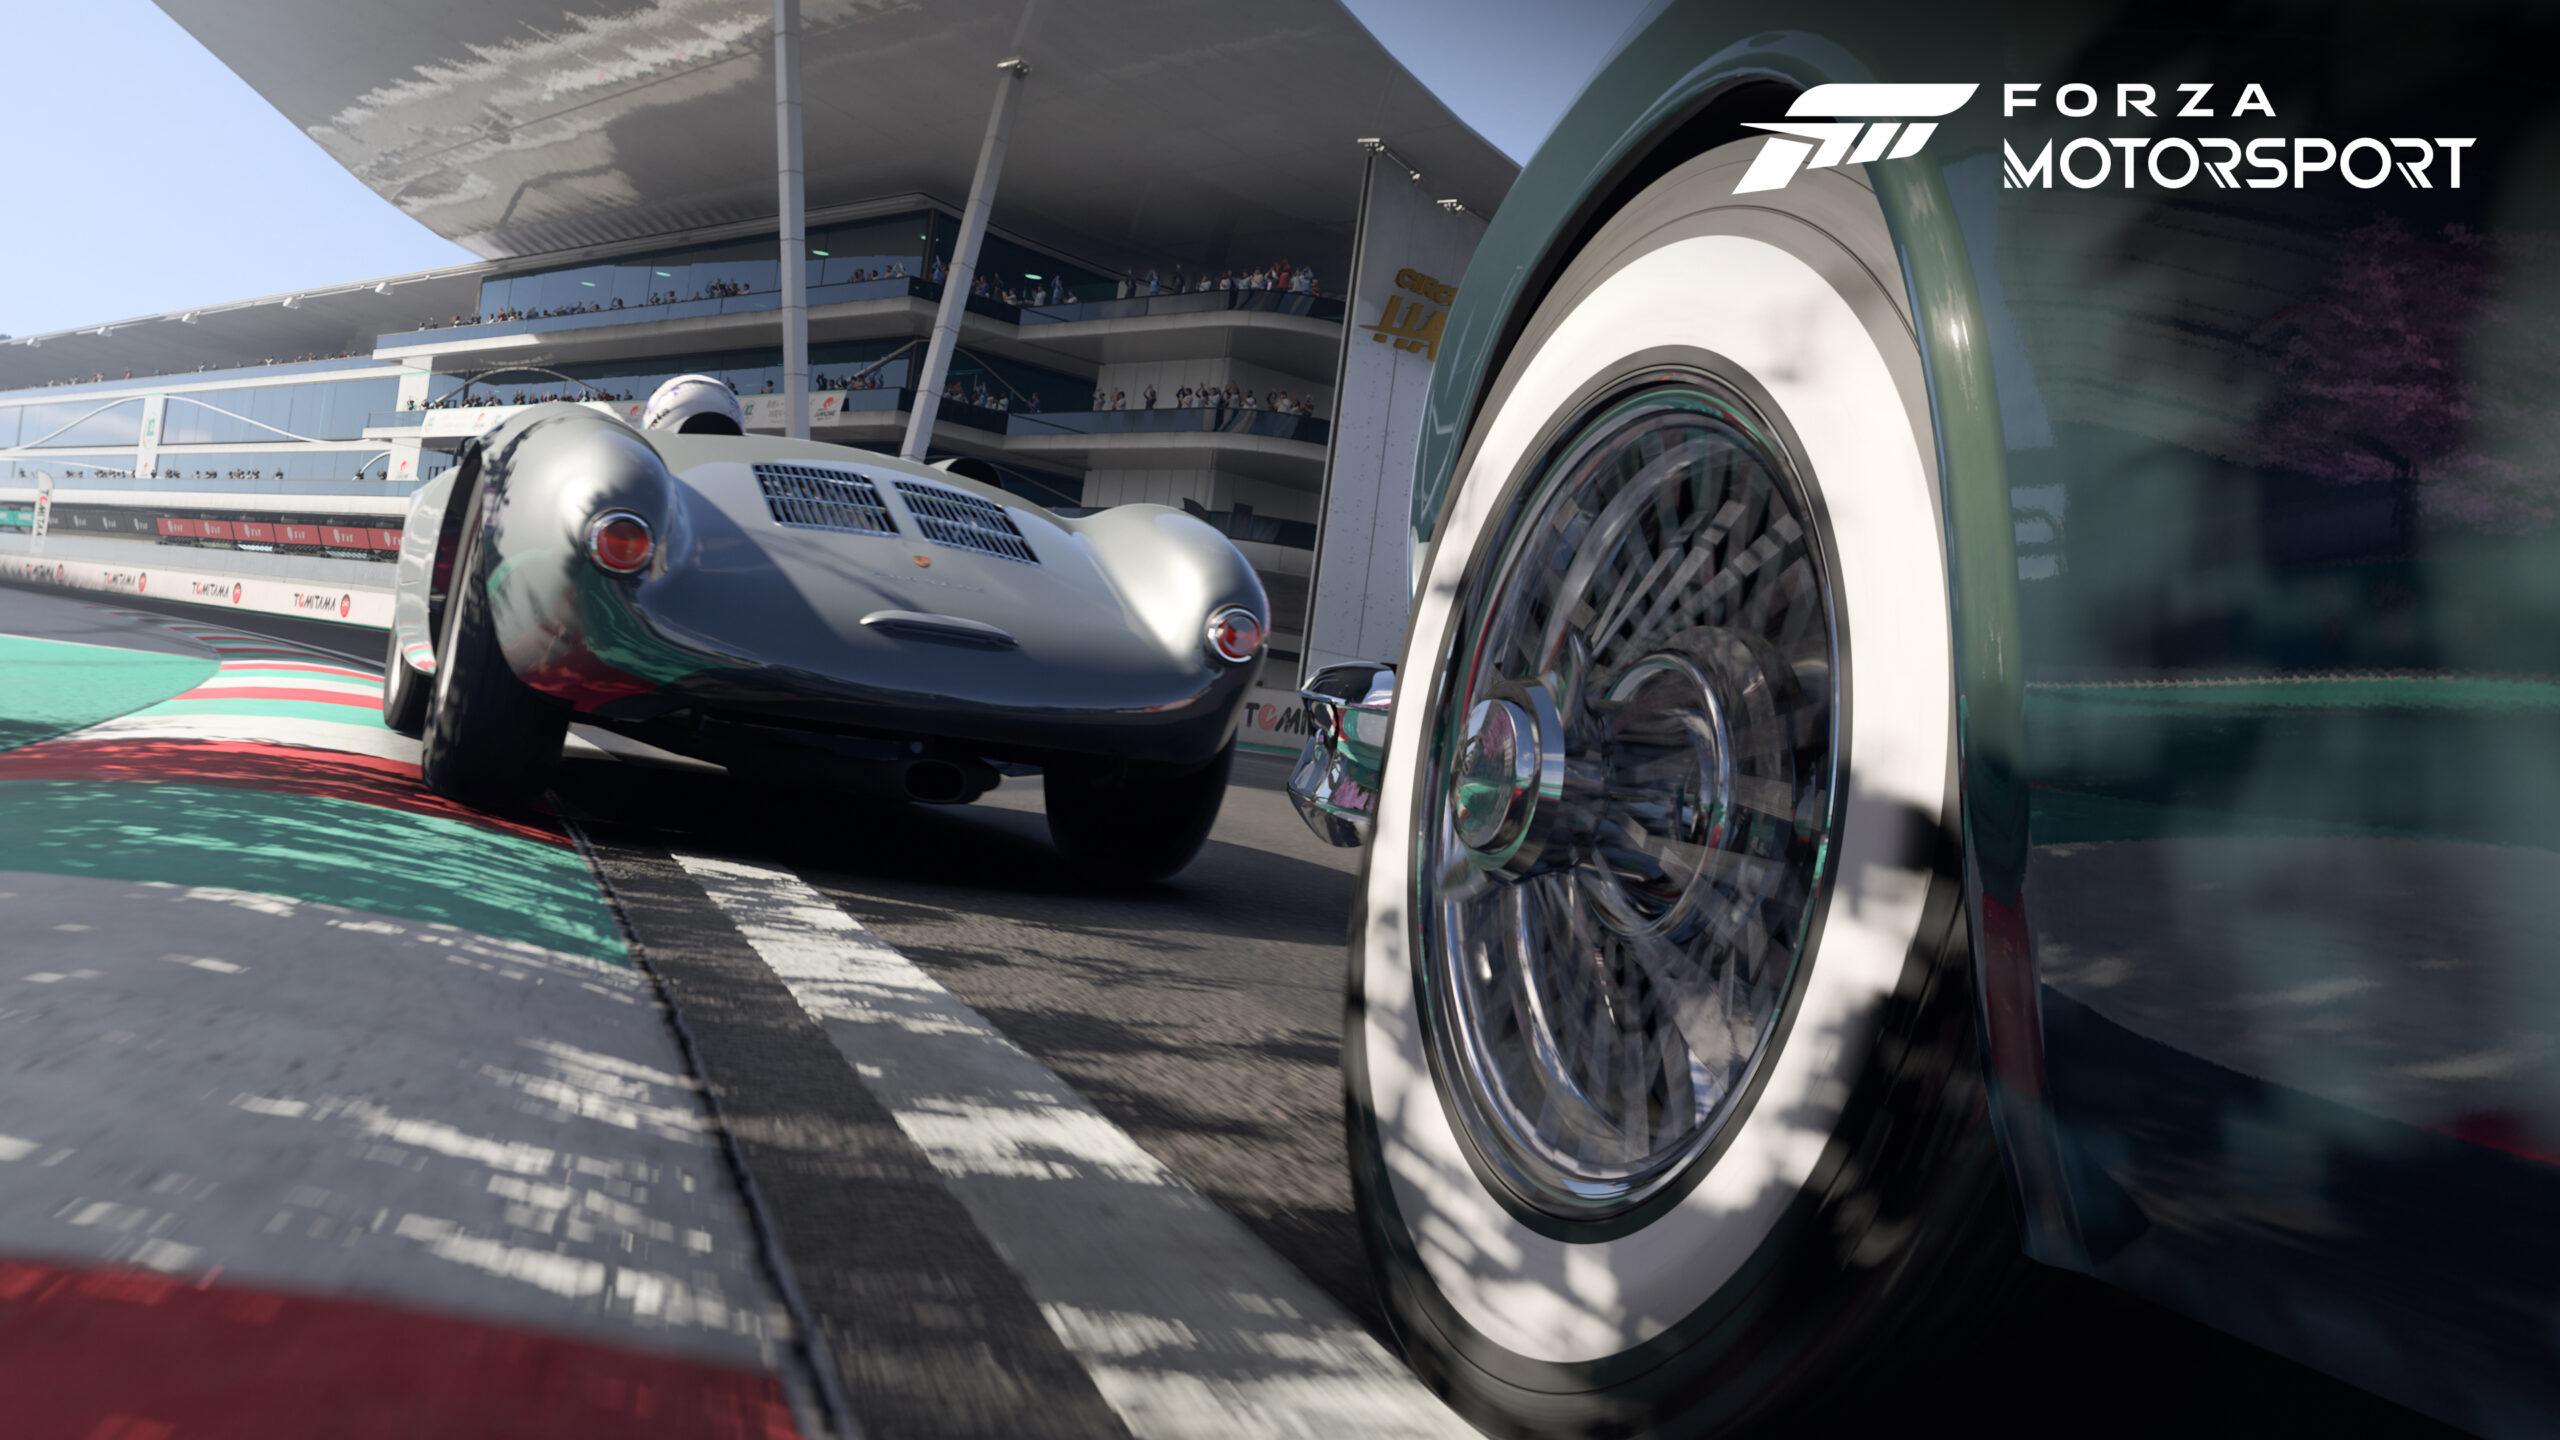 New Forza Motorsport with 500 Cars Is Coming Oct. 10 for Xbox, PC